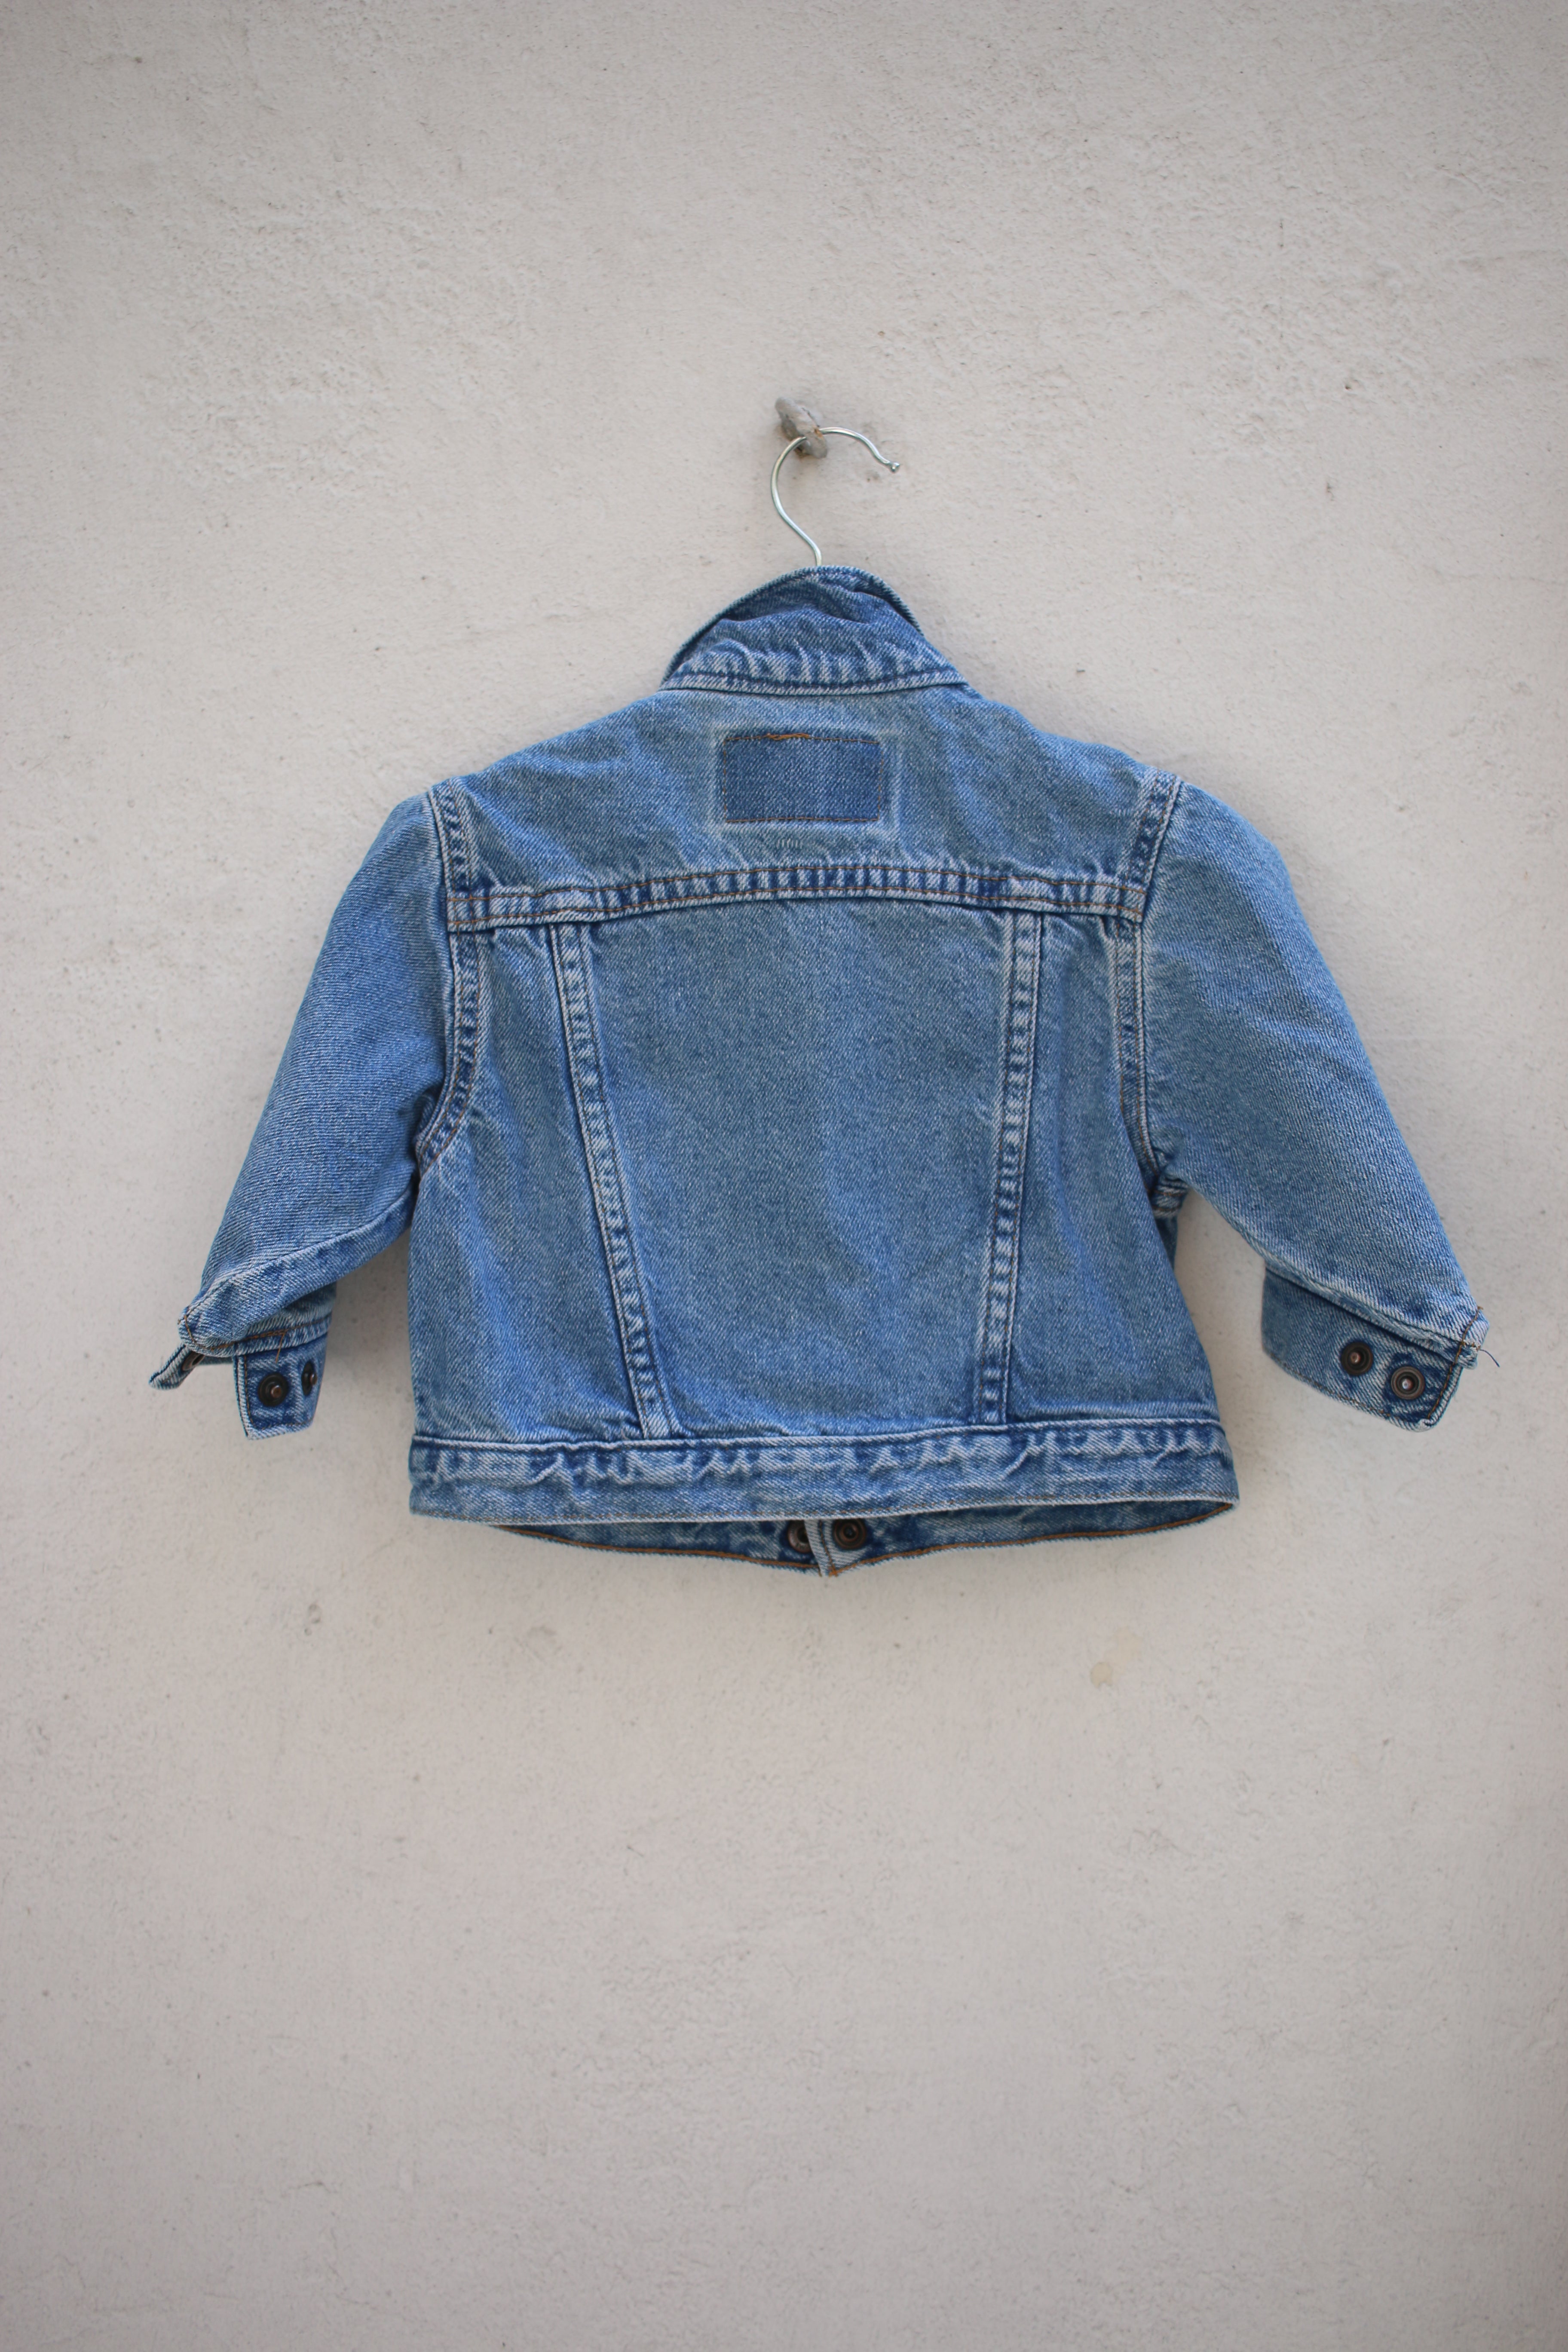 Vintage Levi's trucker jacket - size 12-18 months -made in USA